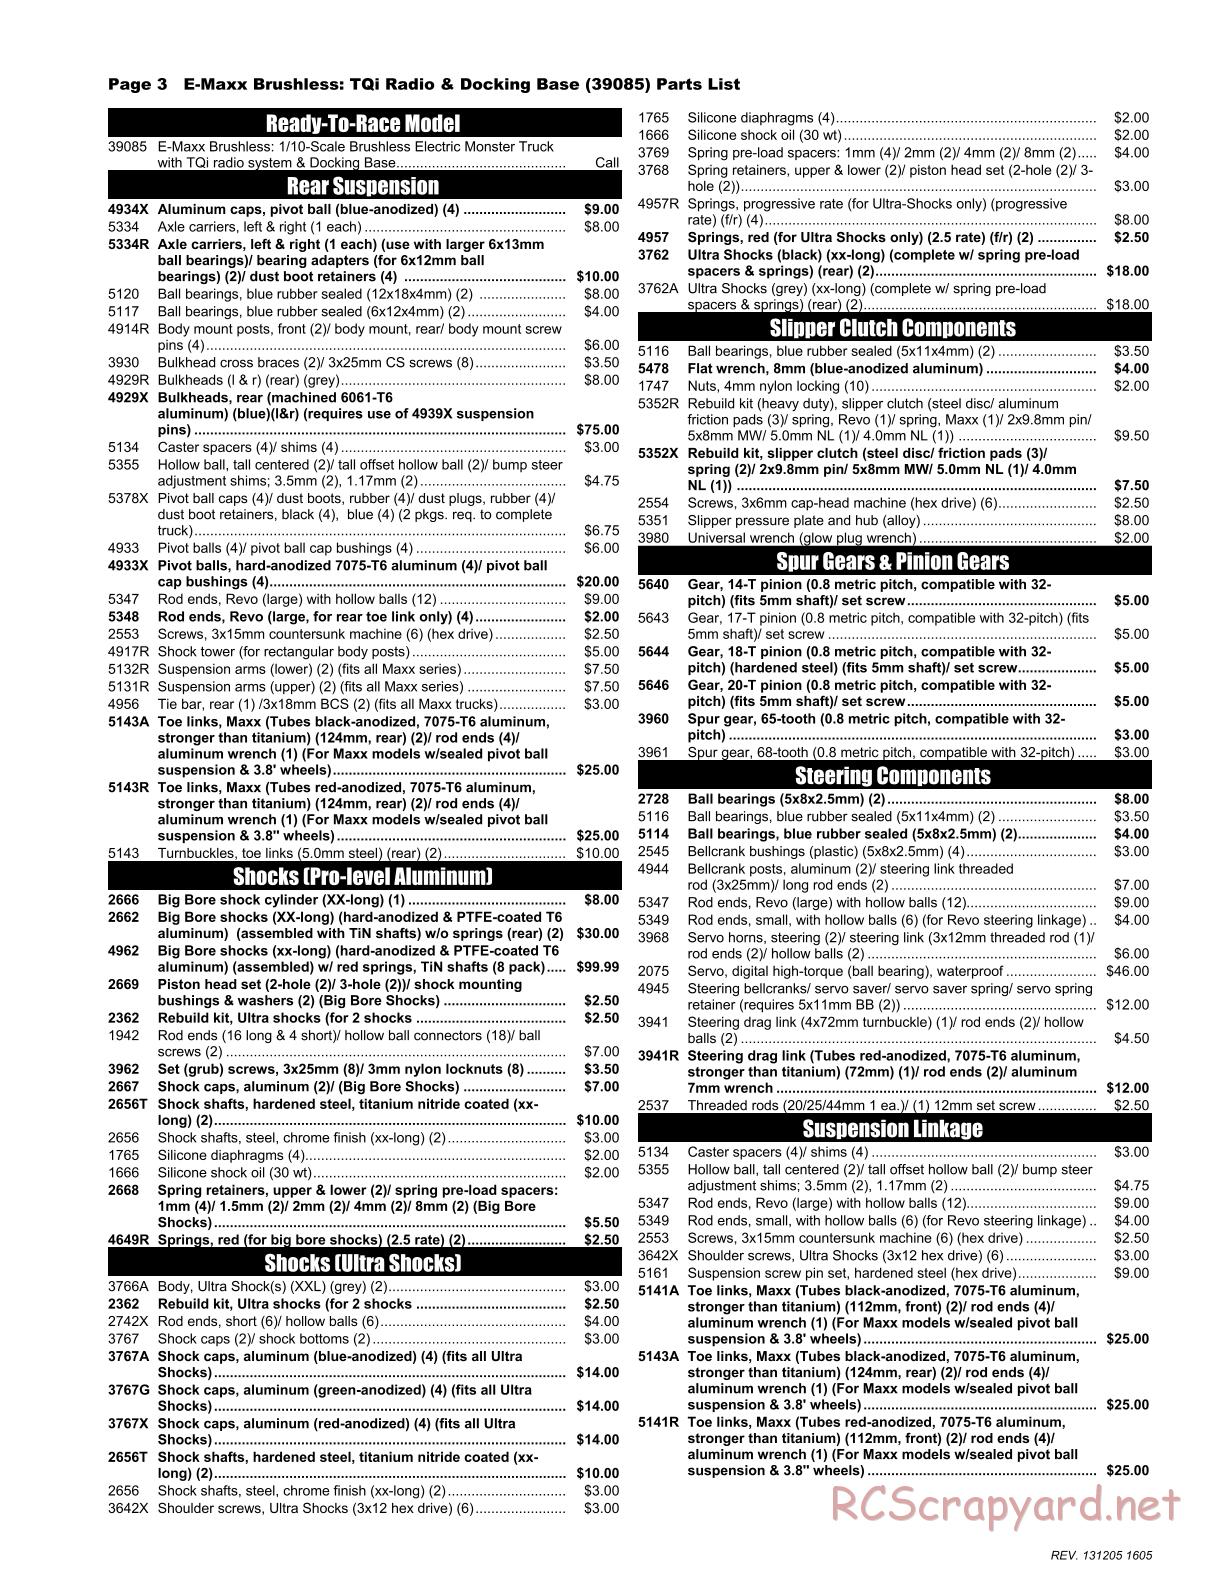 Traxxas - E-Maxx Brushless (2014) - Parts List - Page 3